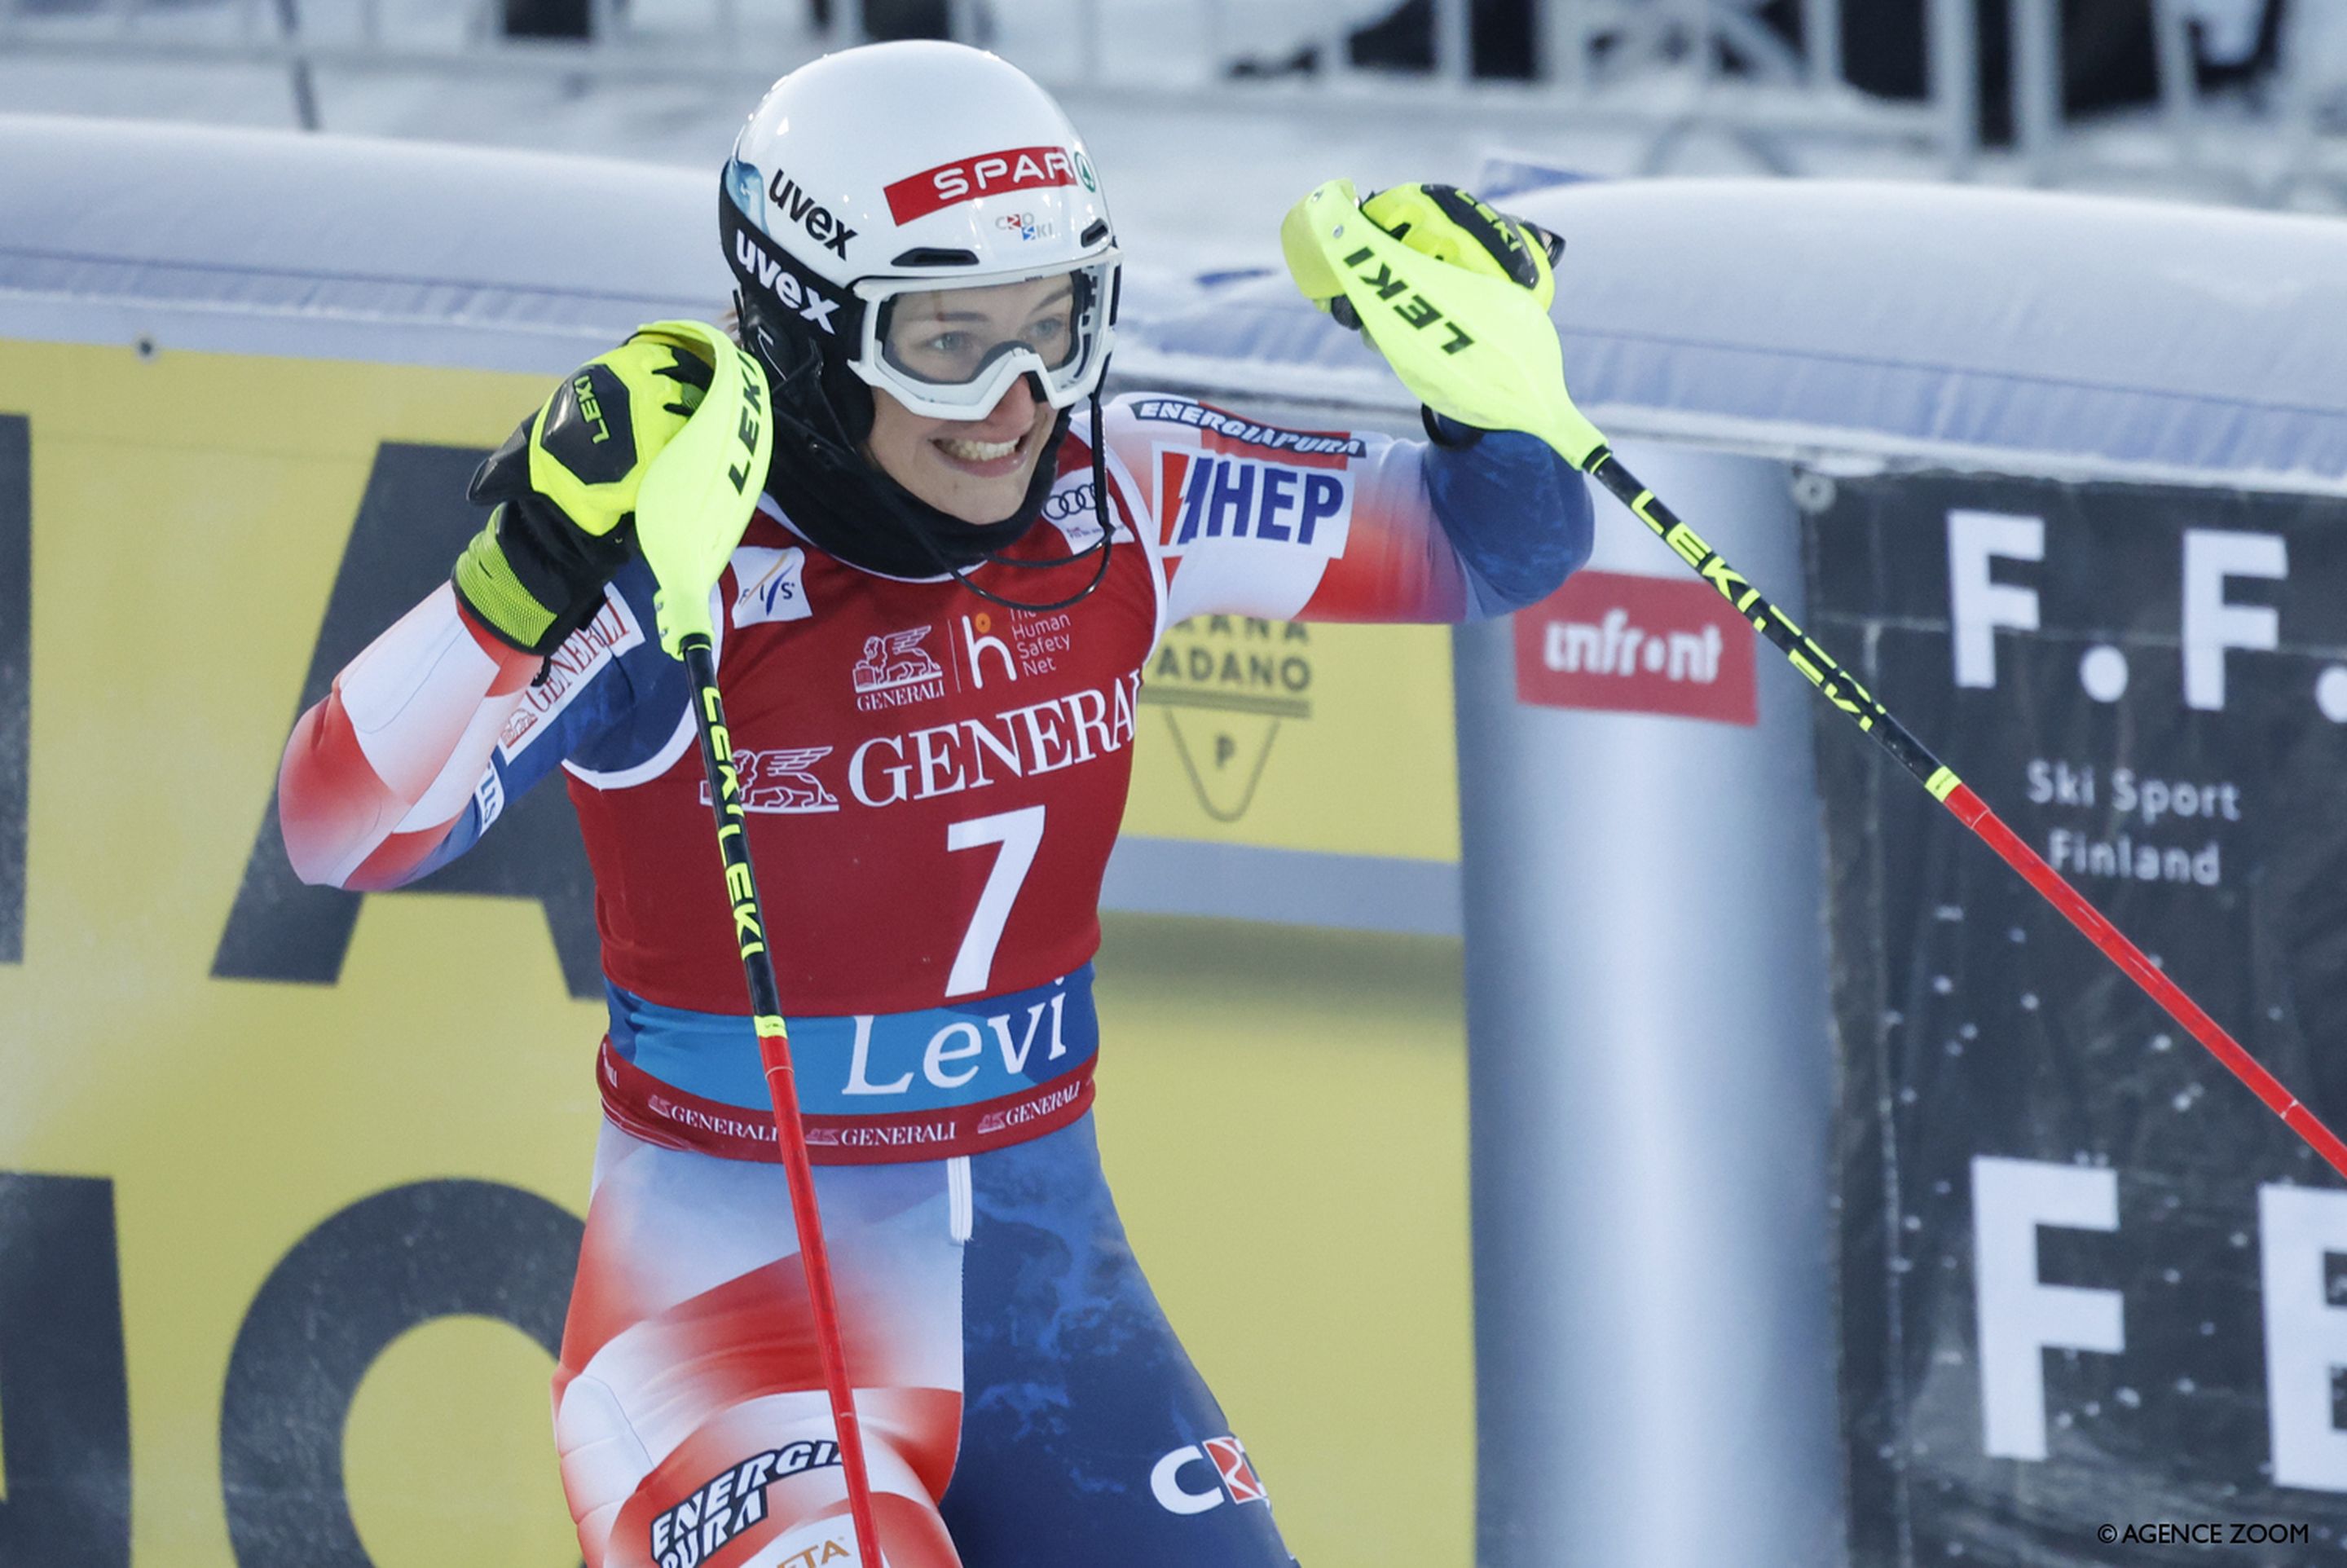 Popovic matched her career-best World Cup result by coming second in Sunday's slalom